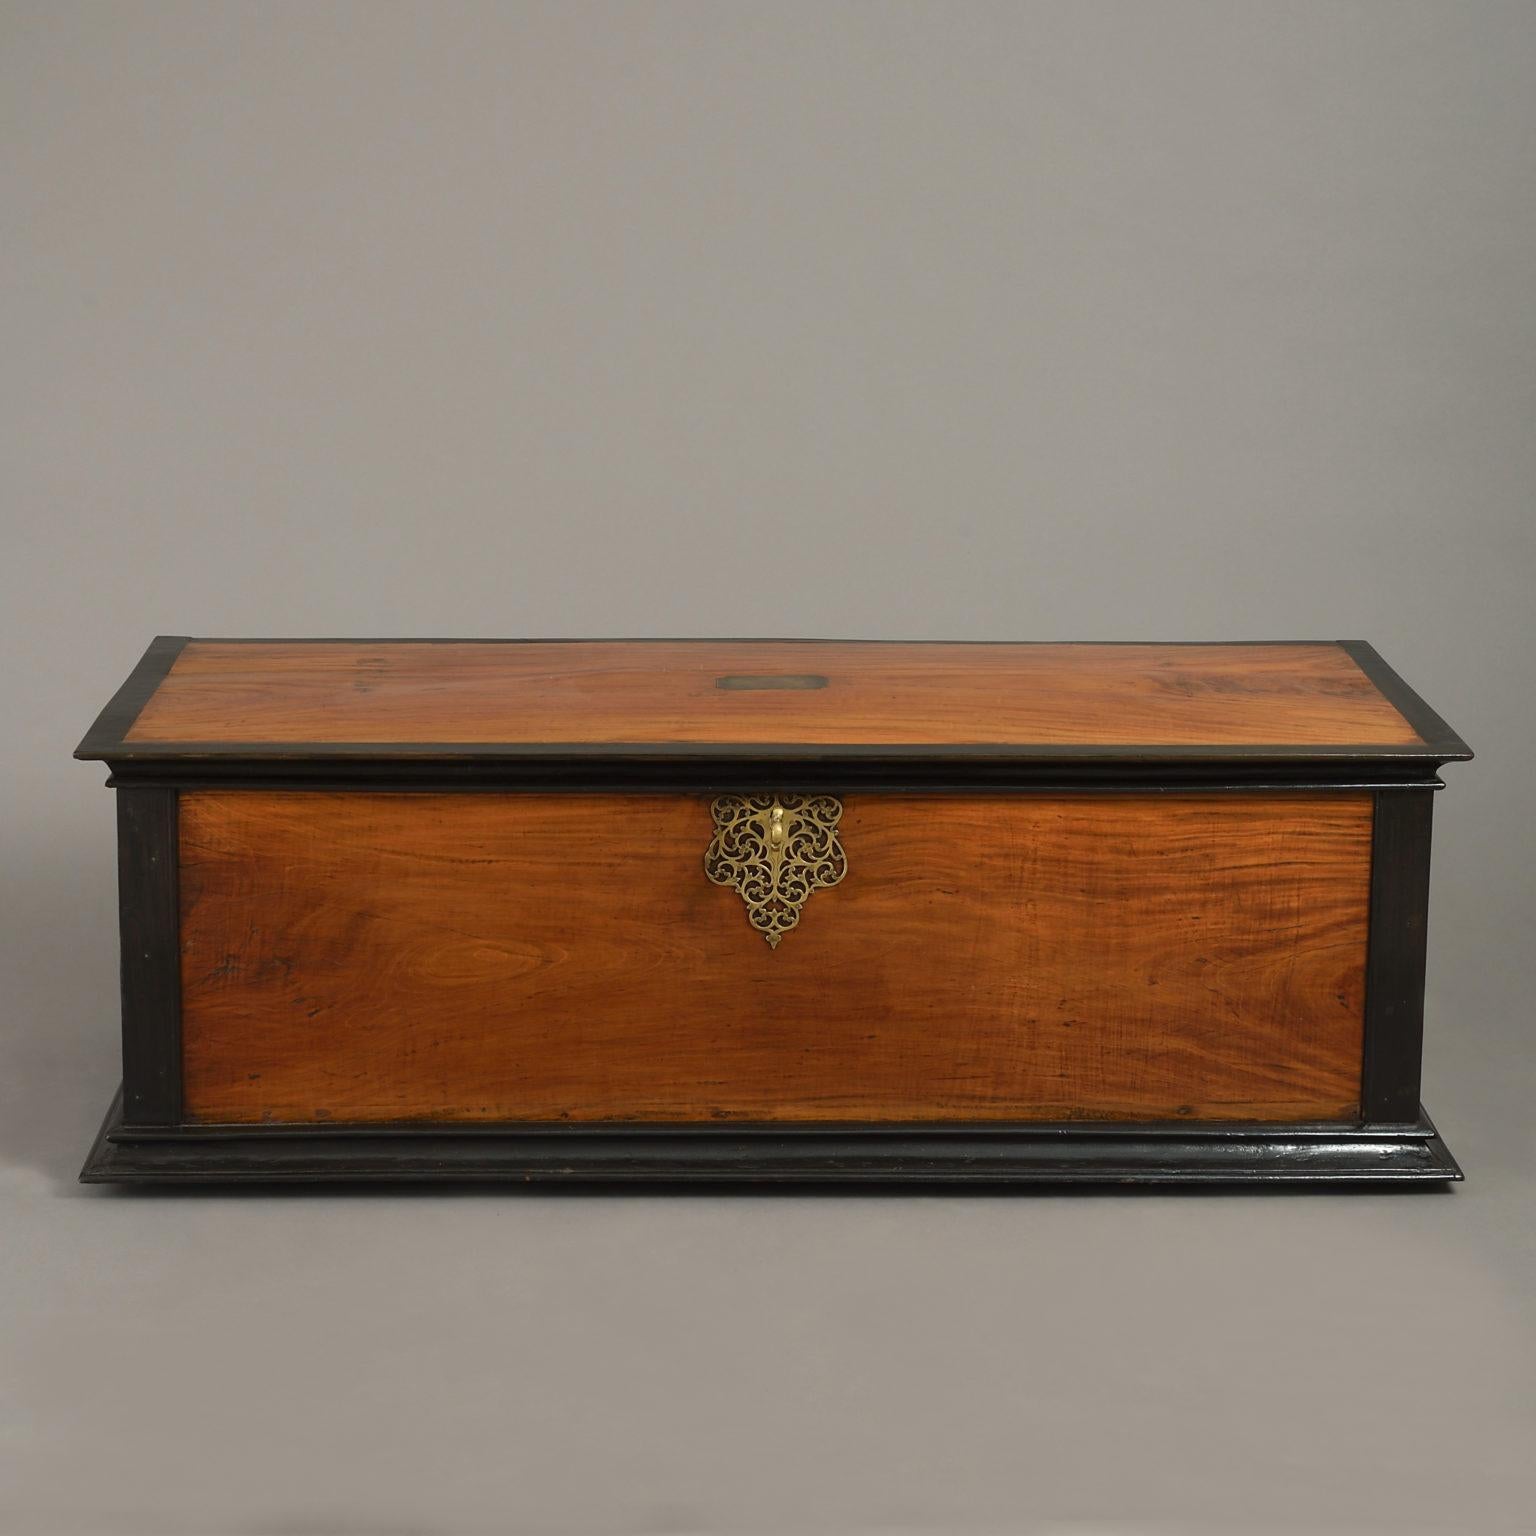 A finely figured camphor wood trunk of rectangular form, the top, corners and base mounted with ebony, having intricate brass carrying handles at either end and a central lock escutcheon and key of the same. The top opens to reveal a candle box.